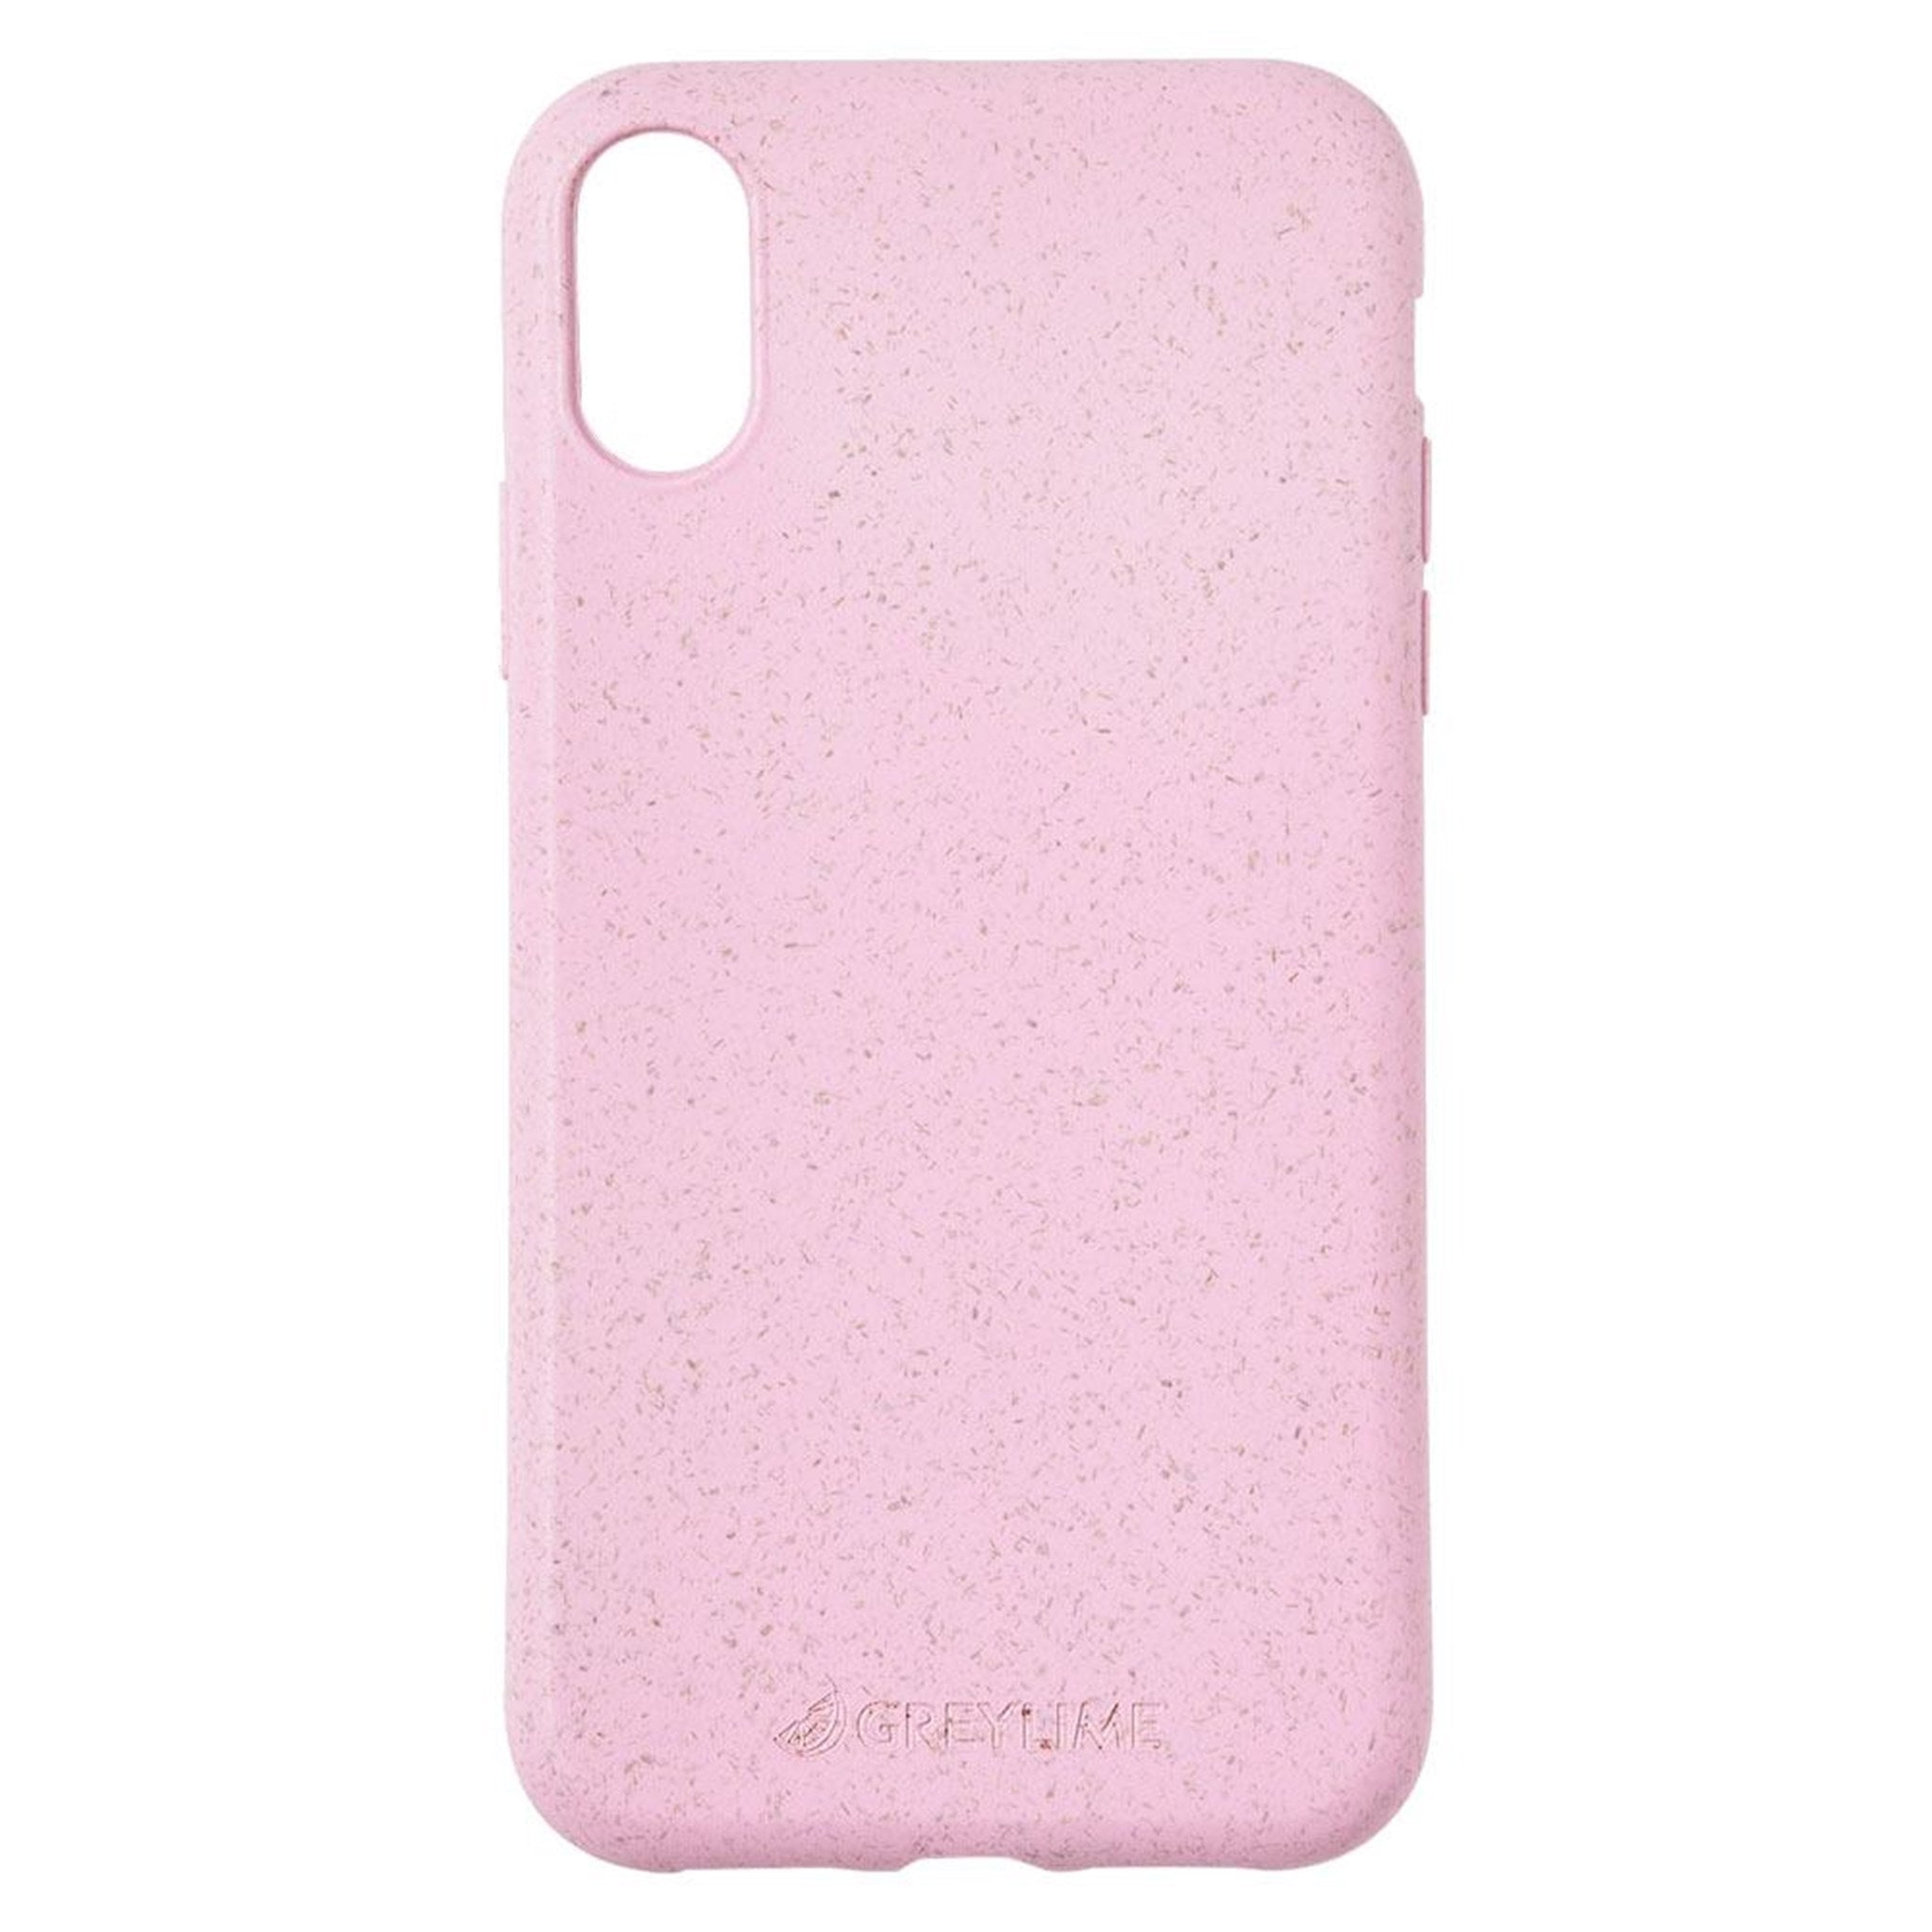 GreyLime-iPhone-XR-biodegradable-cover-Pink-COIPXR05-V4.jpg